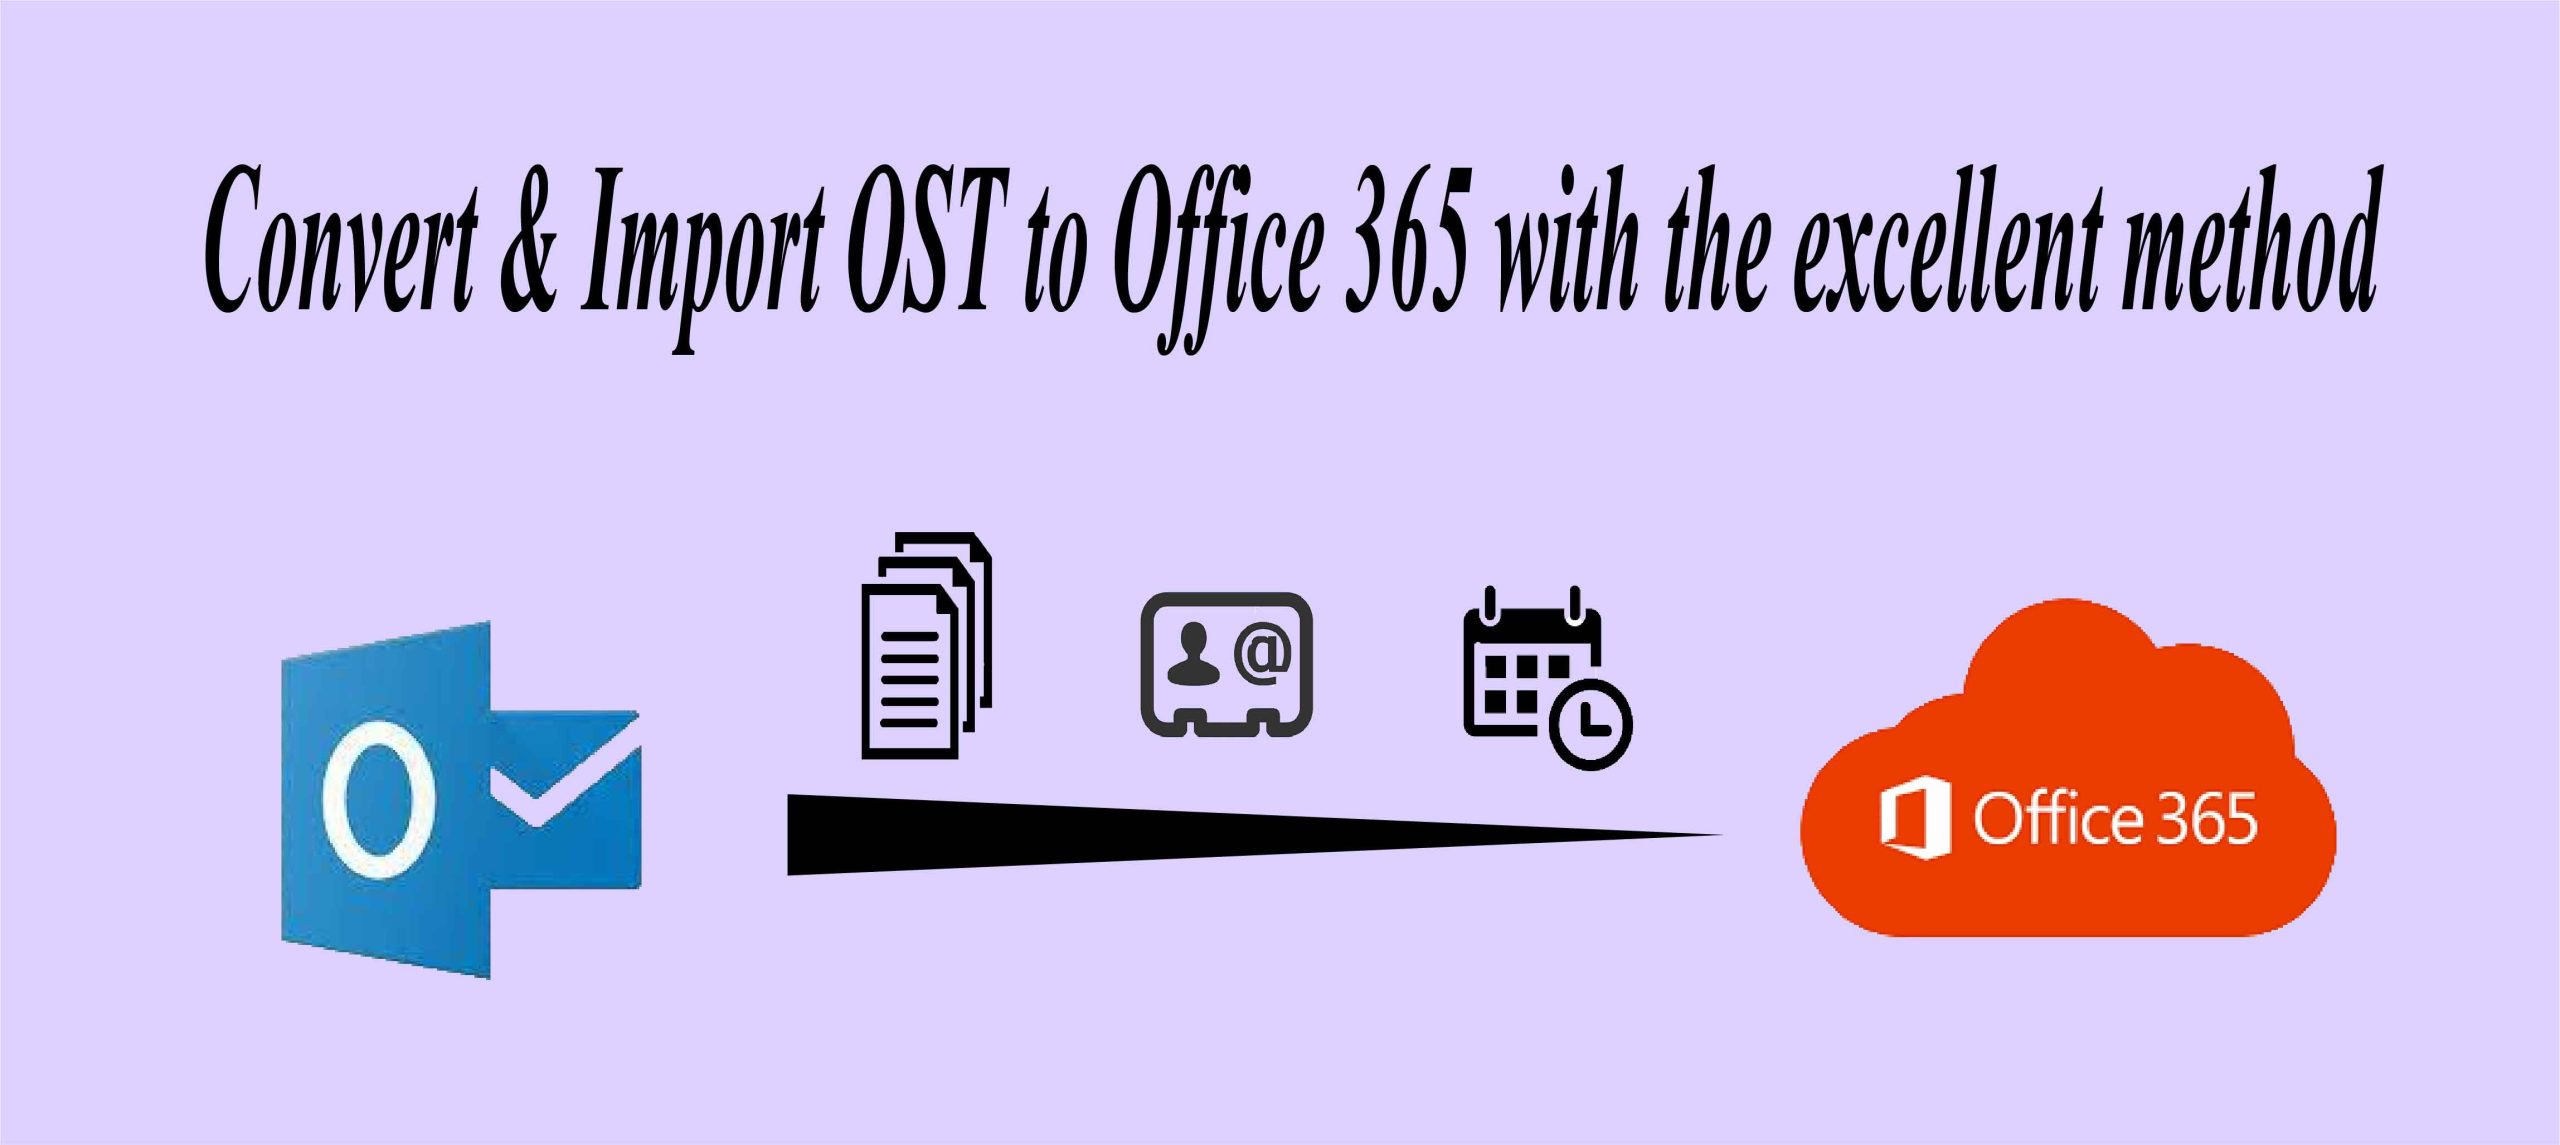 Convert & Import OST to Office 365 with the excellent Method - The Today Posts